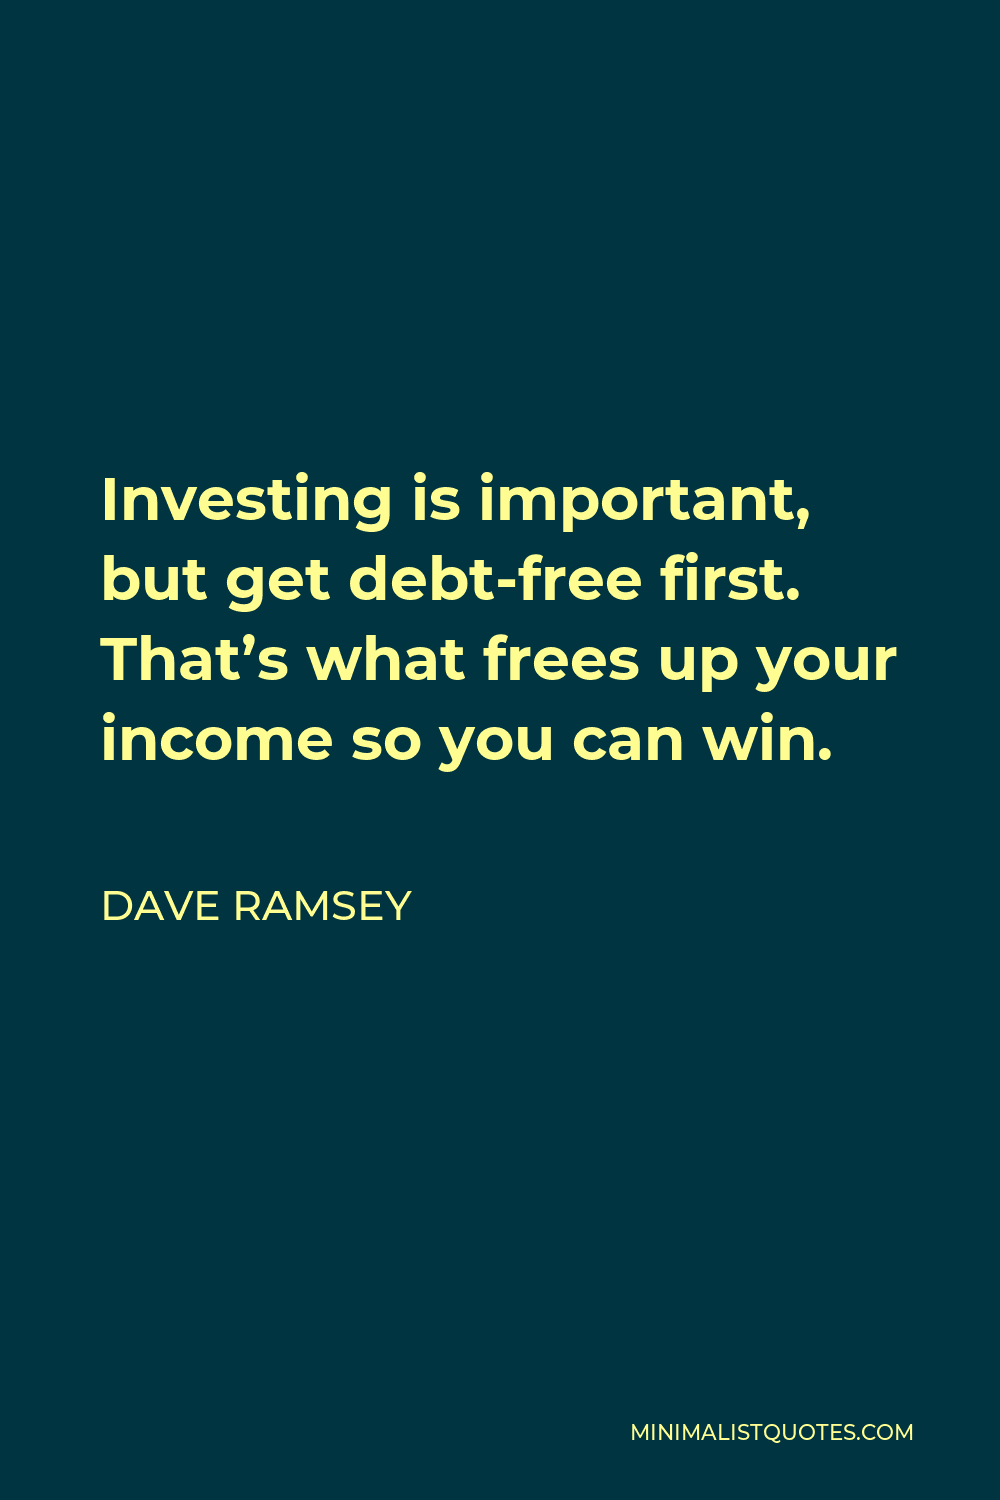 Dave Ramsey Quote - Investing is important, but get debt-free first. That’s what frees up your income so you can win.